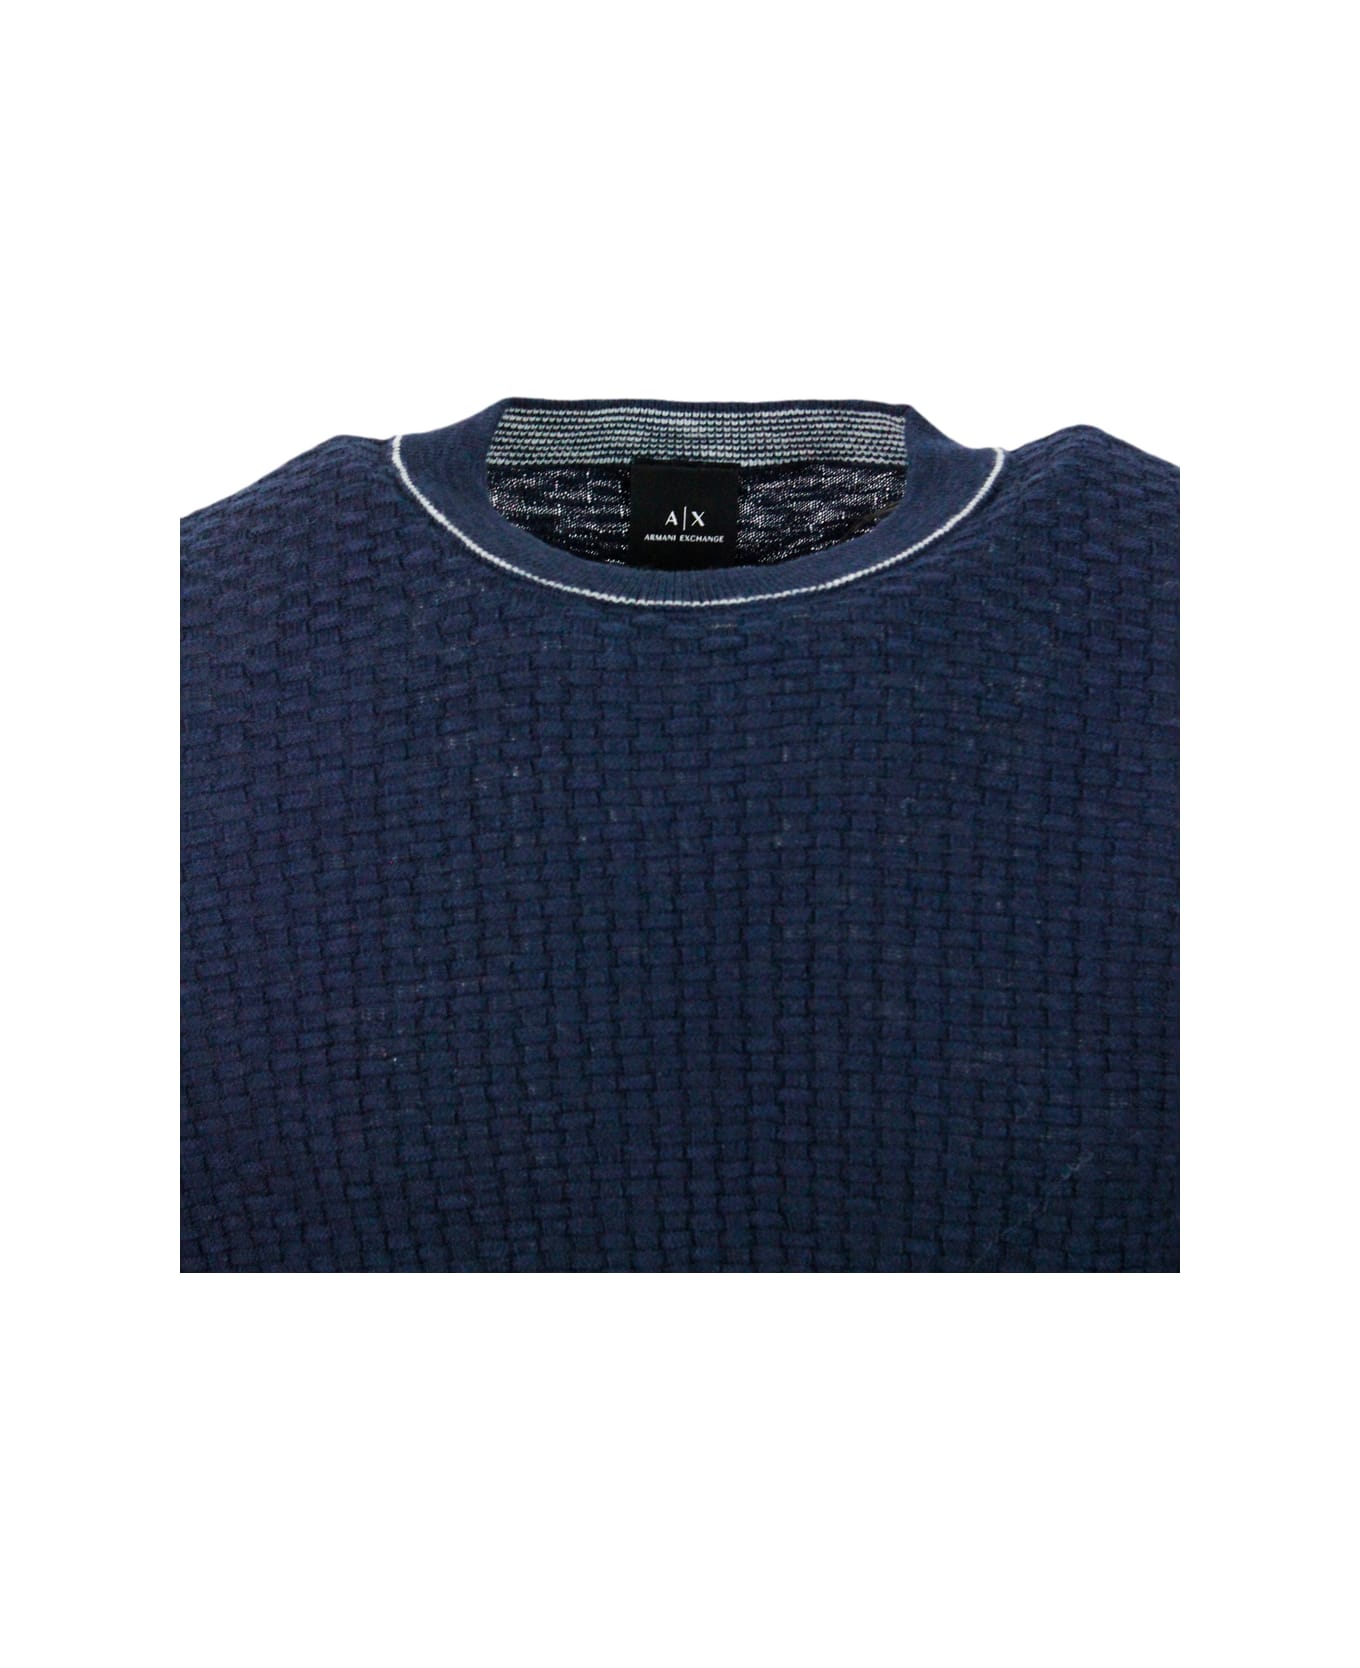 Armani Collezioni Crew-neck And Long-sleeved Sweater In Cotton And Linen With Honeycomb Workmanship. - Blu ニットウェア